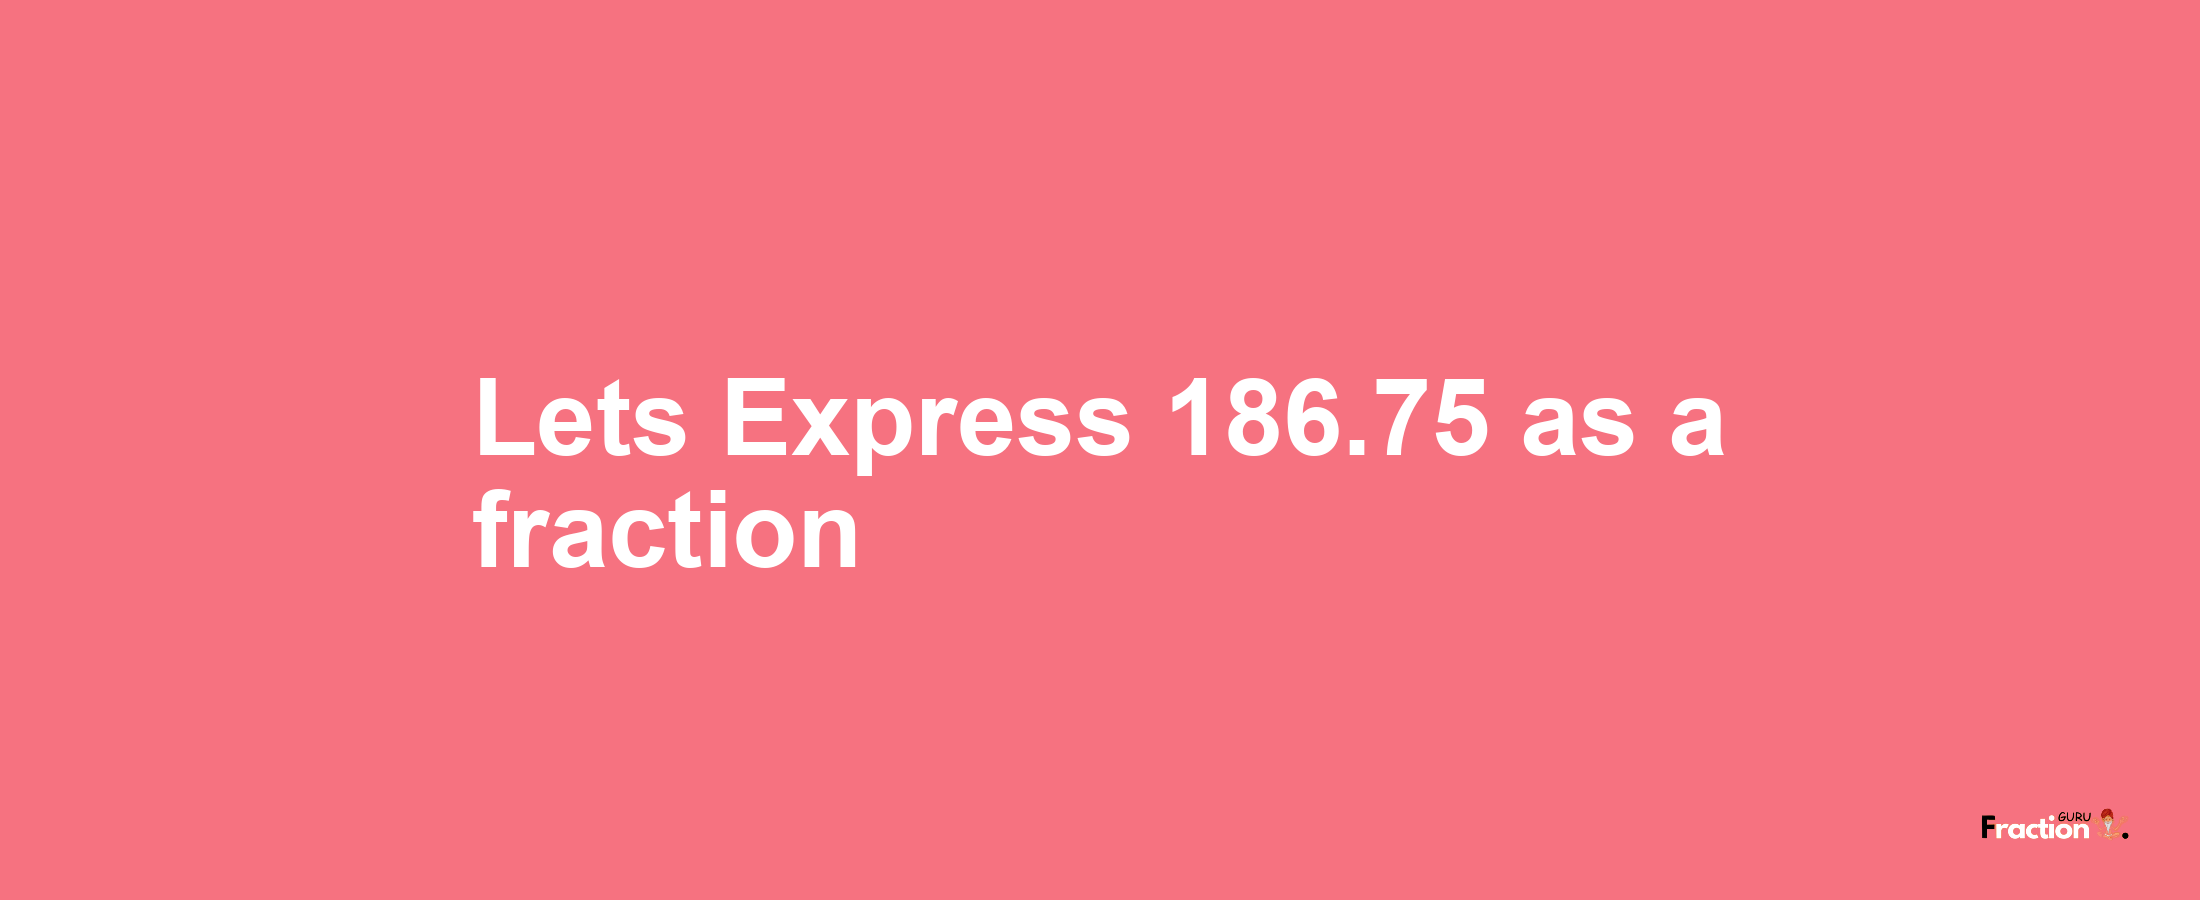 Lets Express 186.75 as afraction